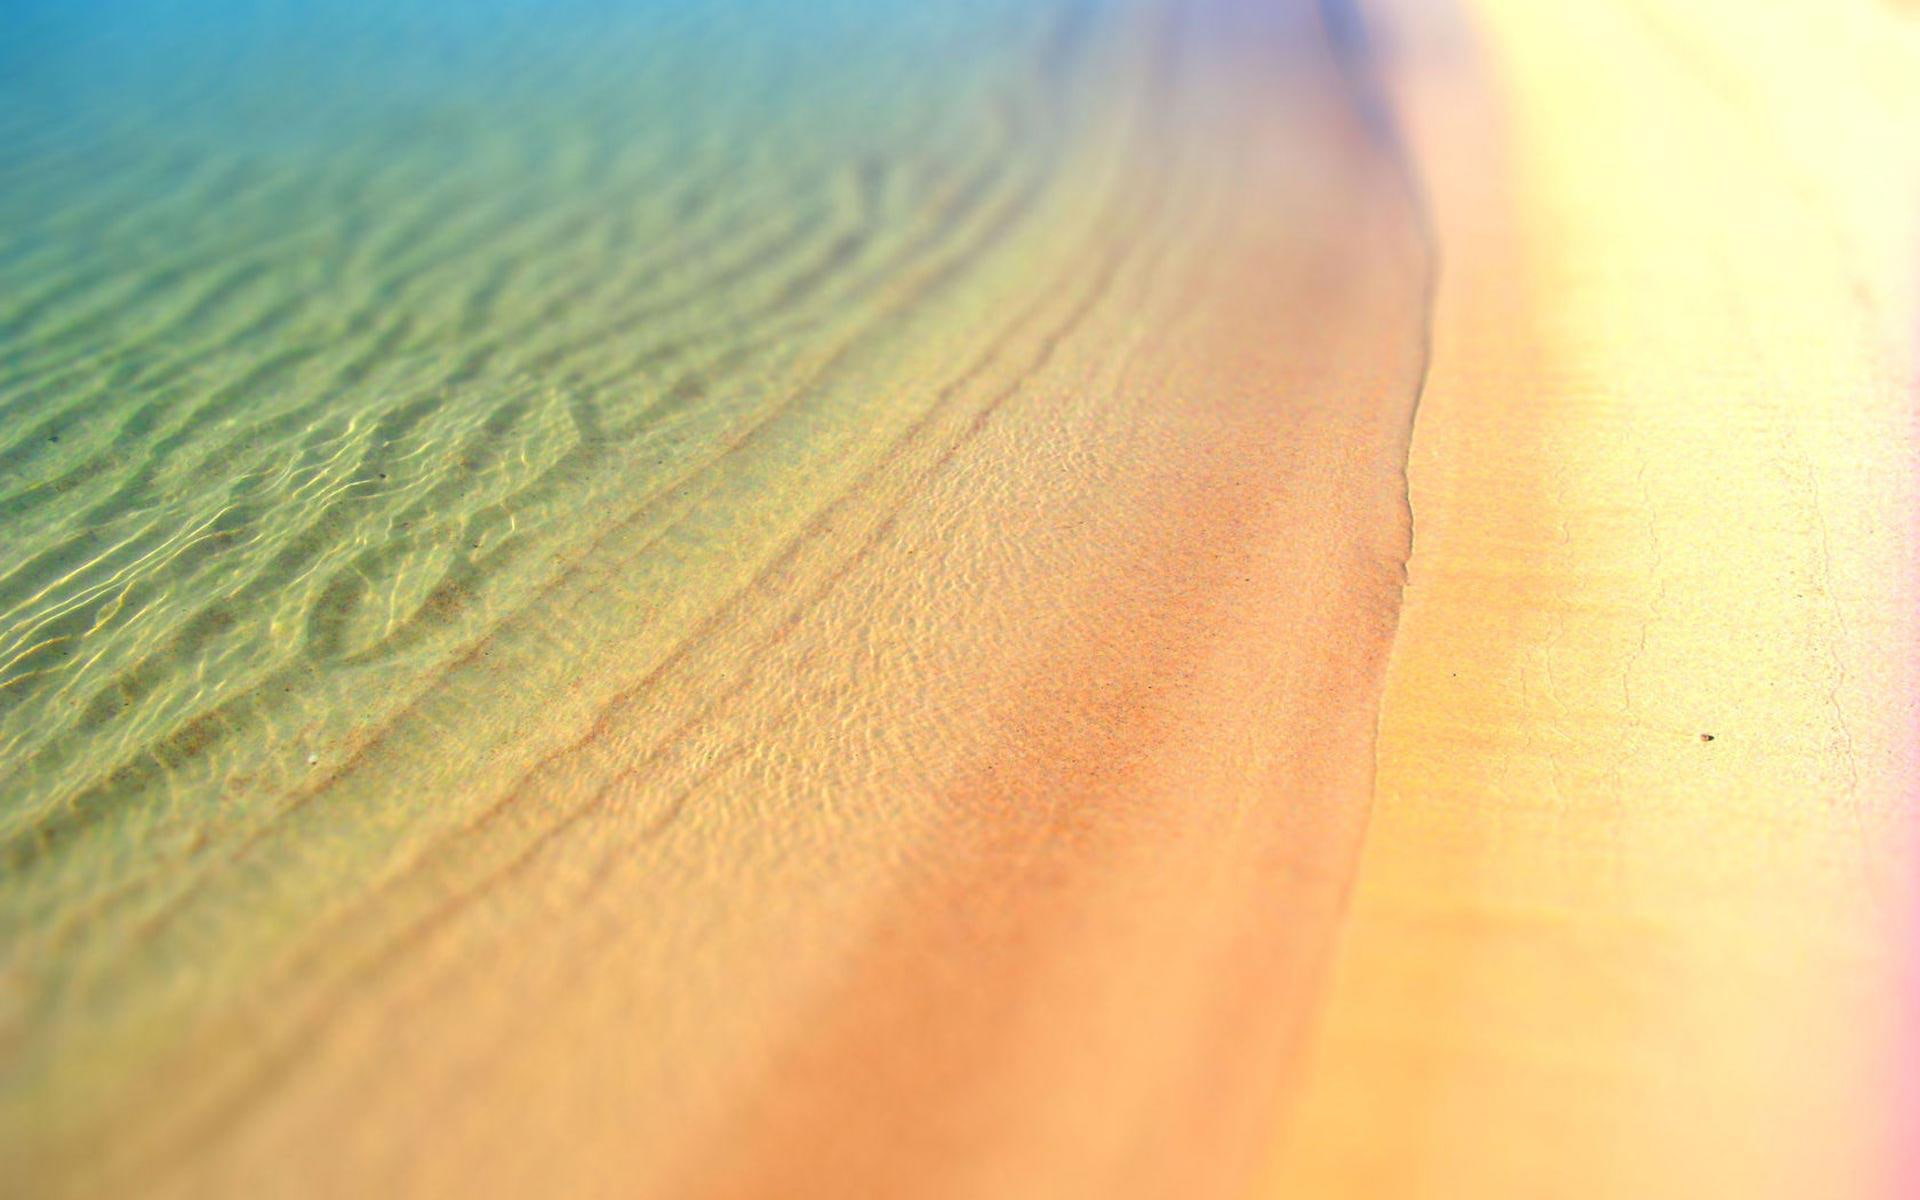 Ocean Ripples Over Sy Beach, beaches, waves, colorful, sand, nature and landscapes